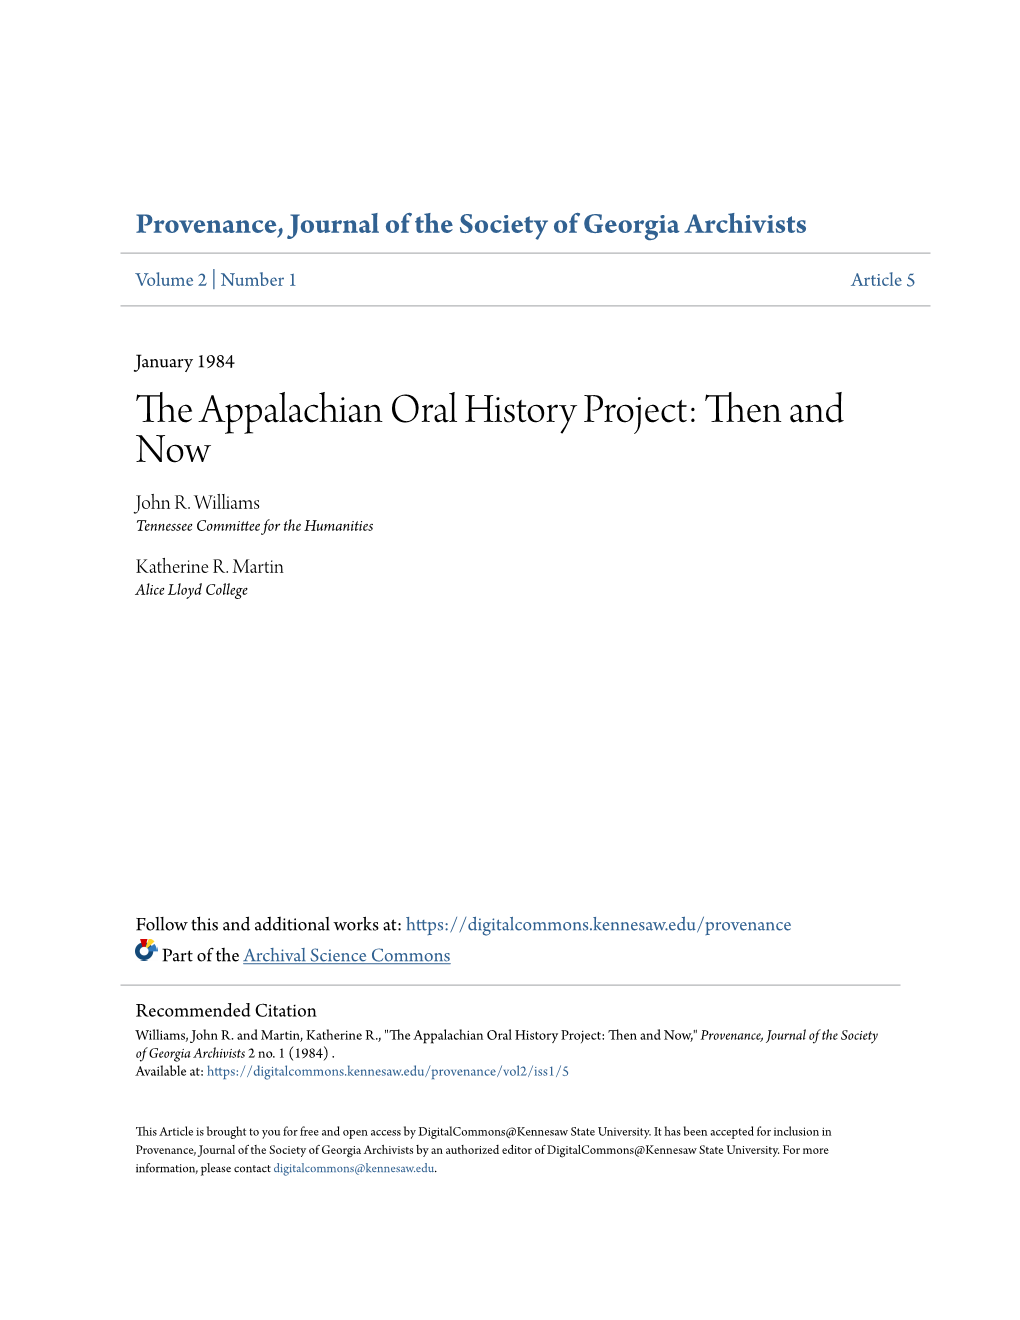 The Appalachian Oral History Project: Then and Now John R